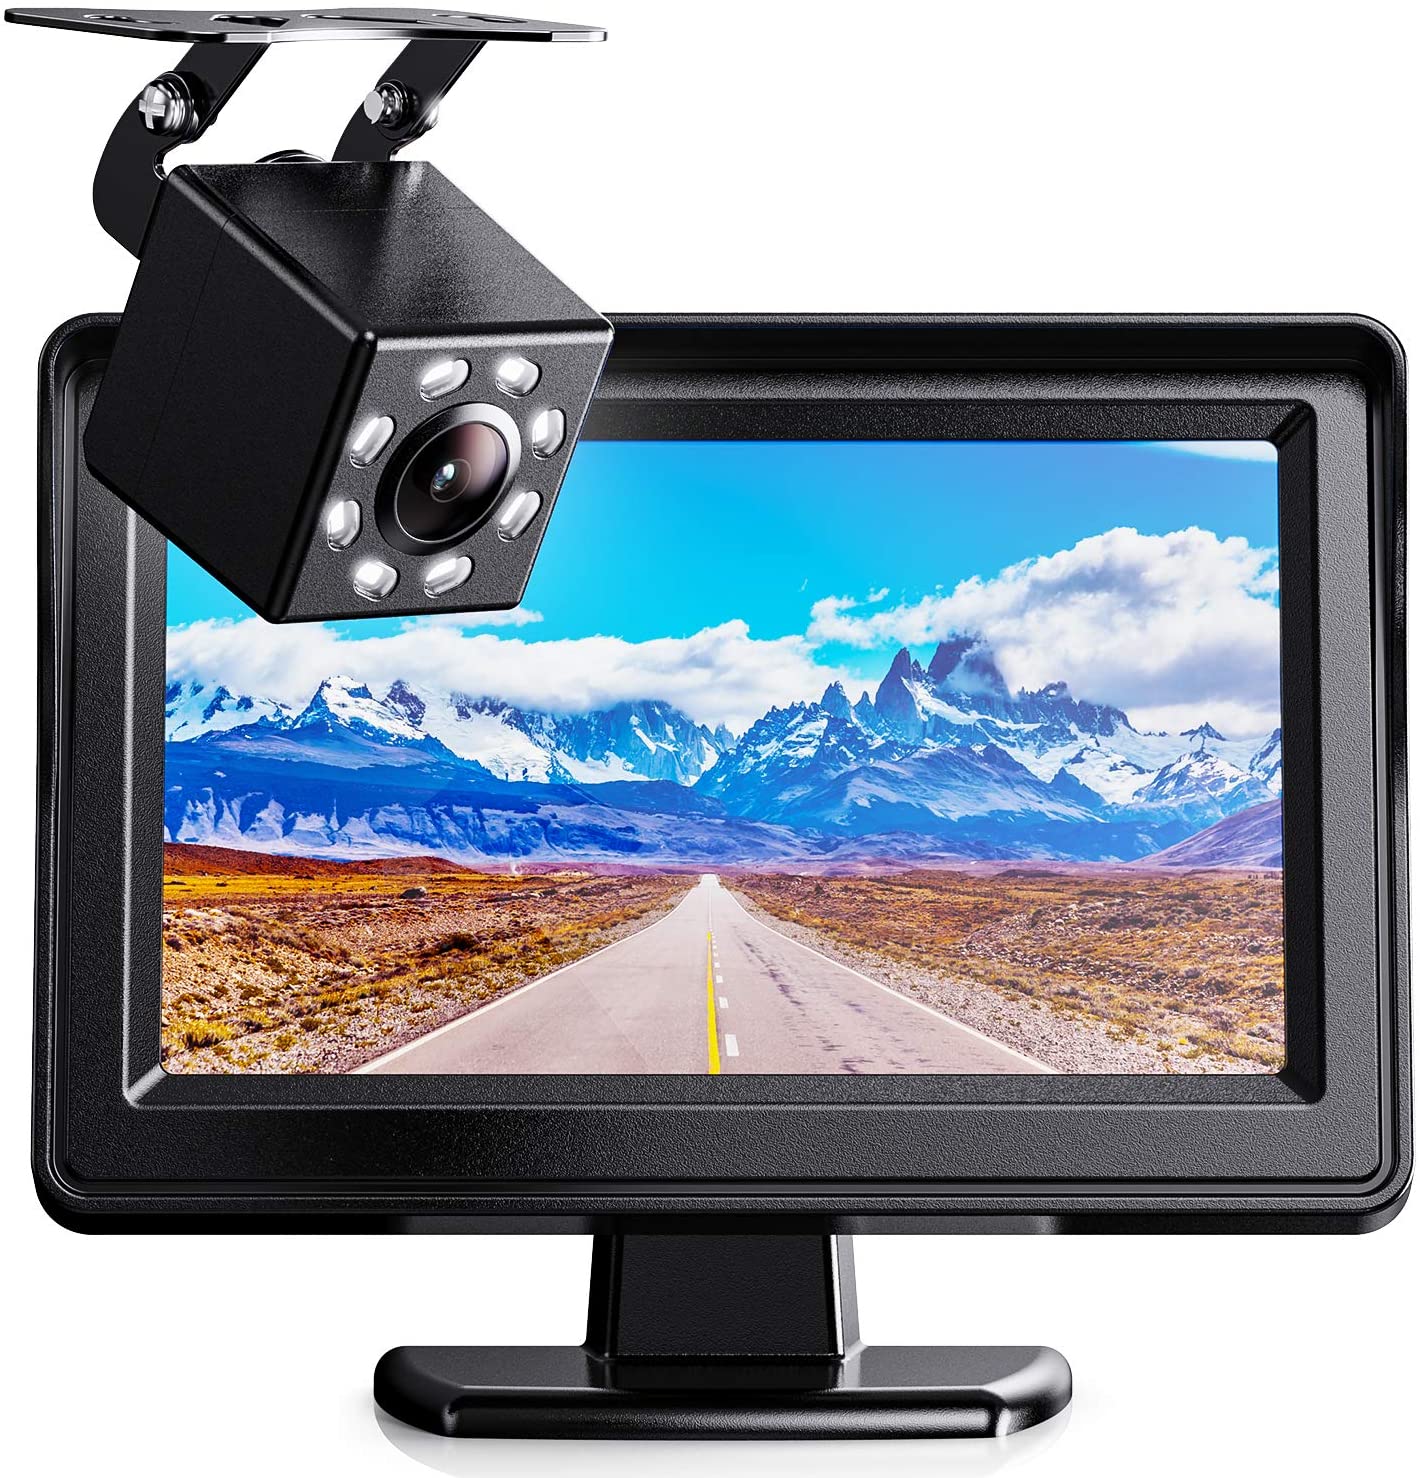 Vehicle Backup Cameras Kits with Monitor Front Rearview Reversing Camera for Small Cars Asistance When Parking + 4.3